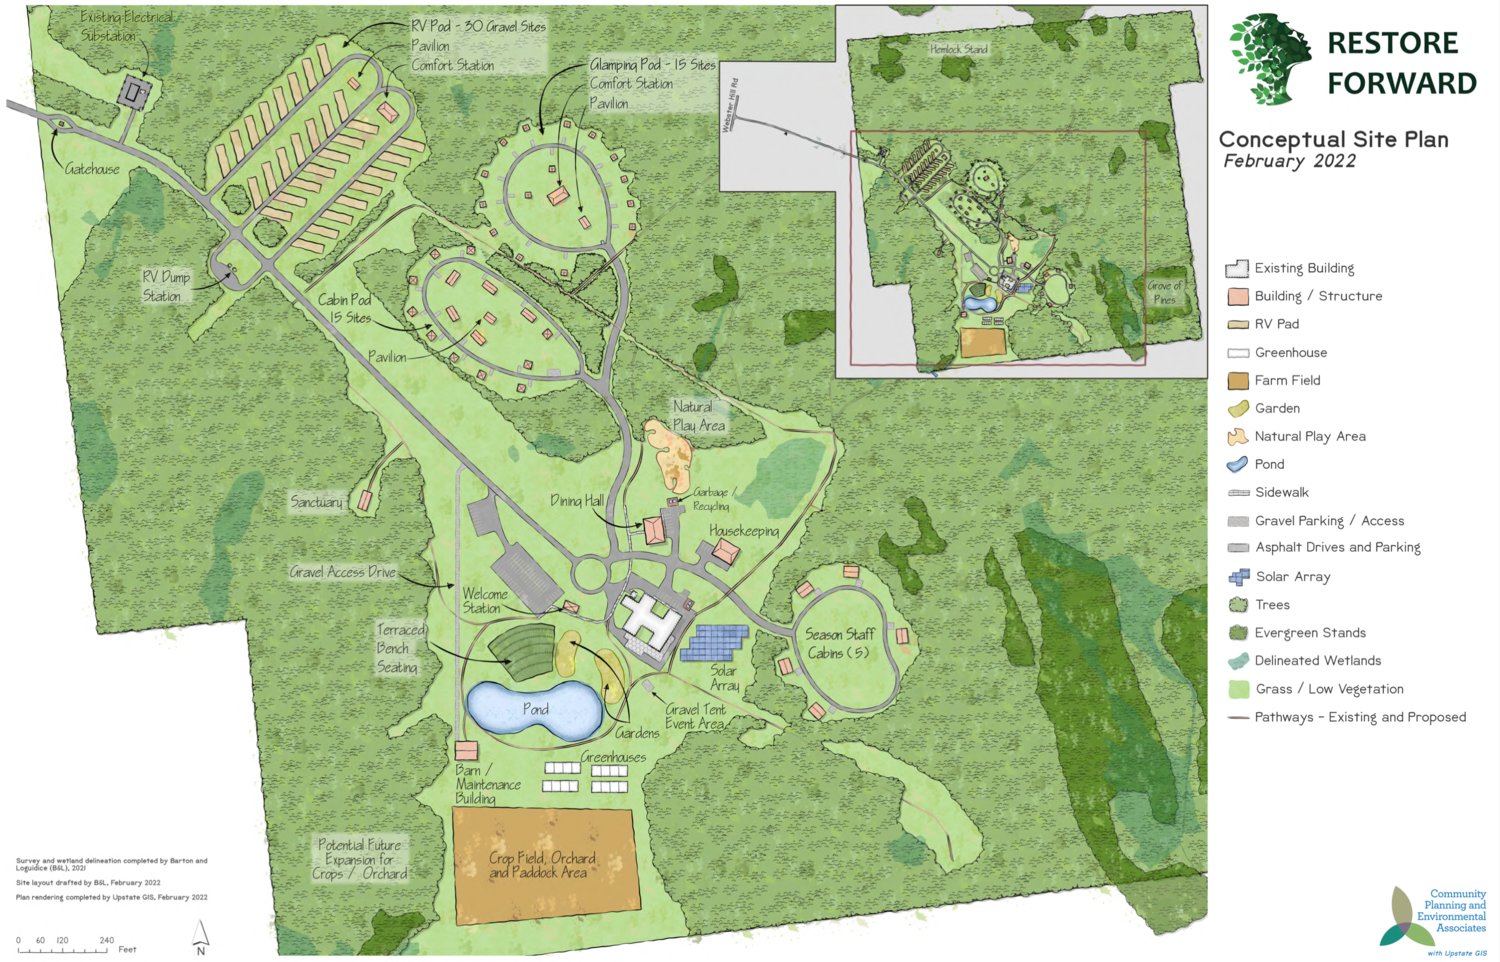 A view of the Concept Site Plan from the Restore Forward Zoning Application and Attachments before the town of Ava.